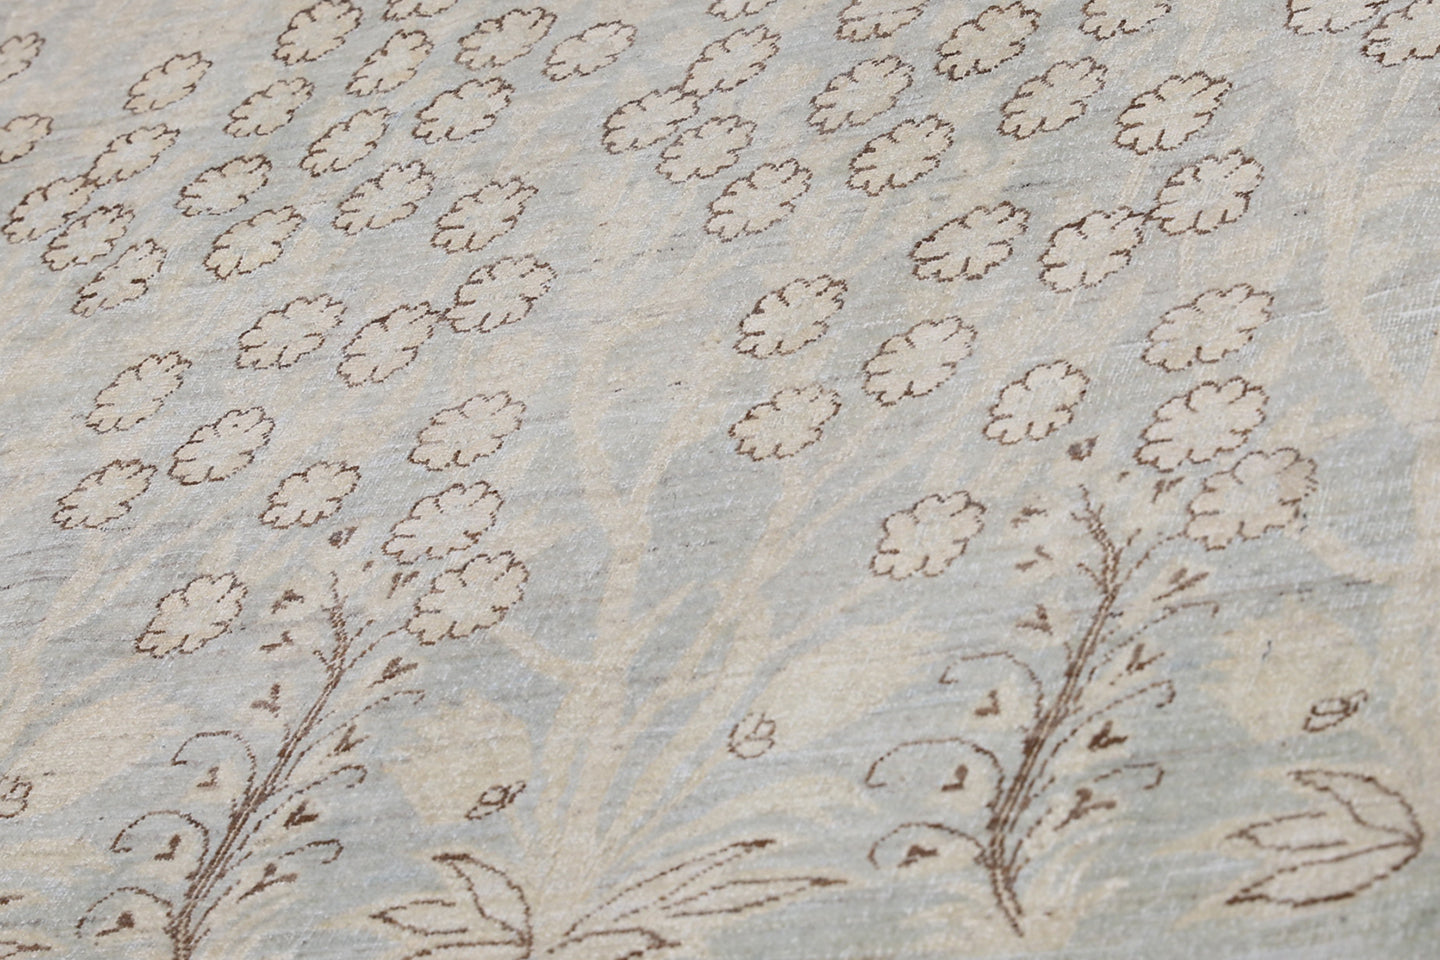 9'x12' Ariana Transitional Blue Brown Floral Design Rug